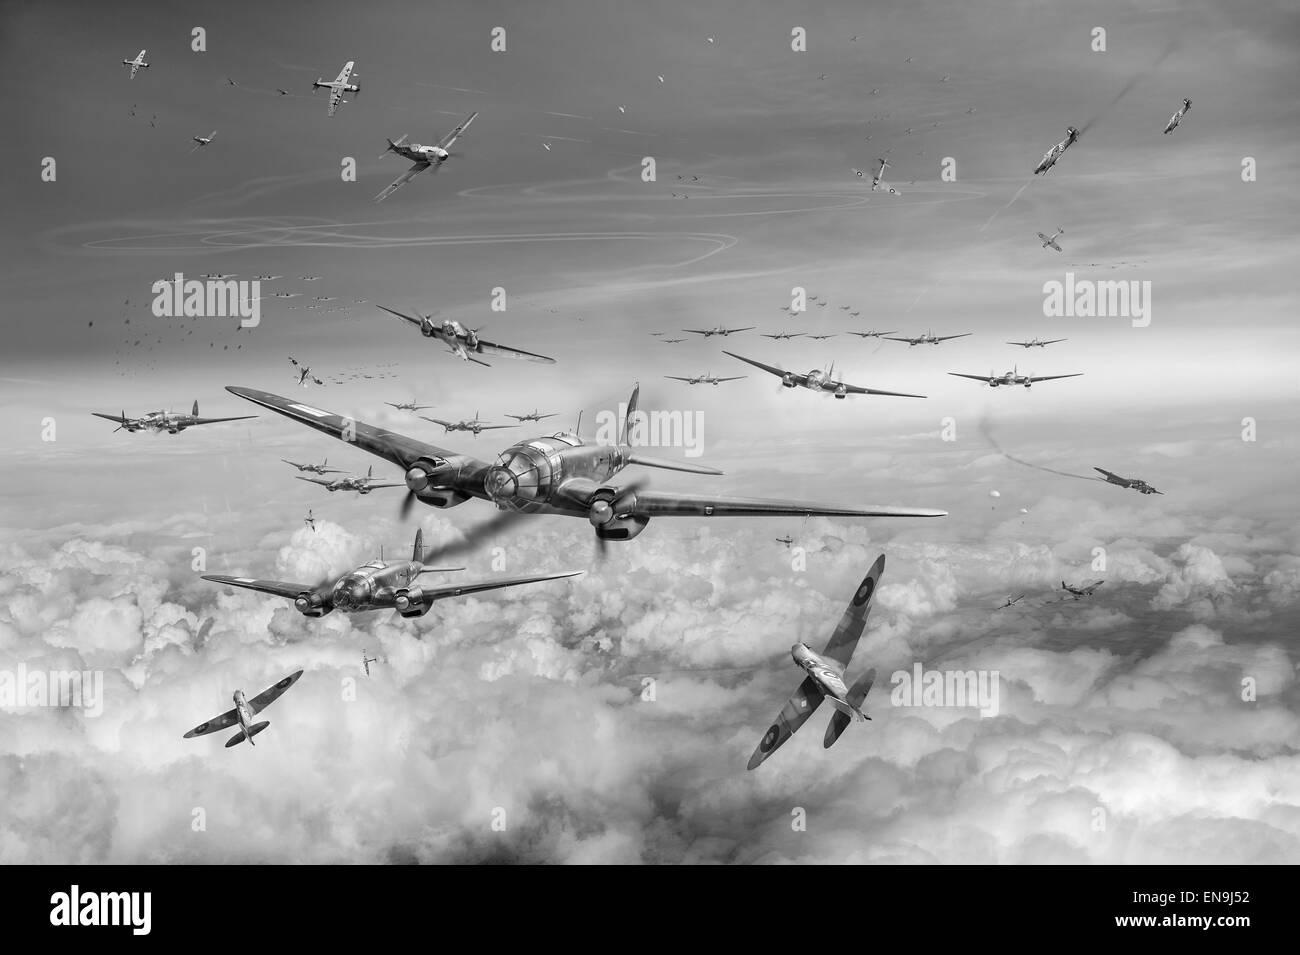 15 September 1940: a key date in the Battle of Britain, as the RAF saw off waves of attacking Luftwaffe bombers and fighters. Stock Photo